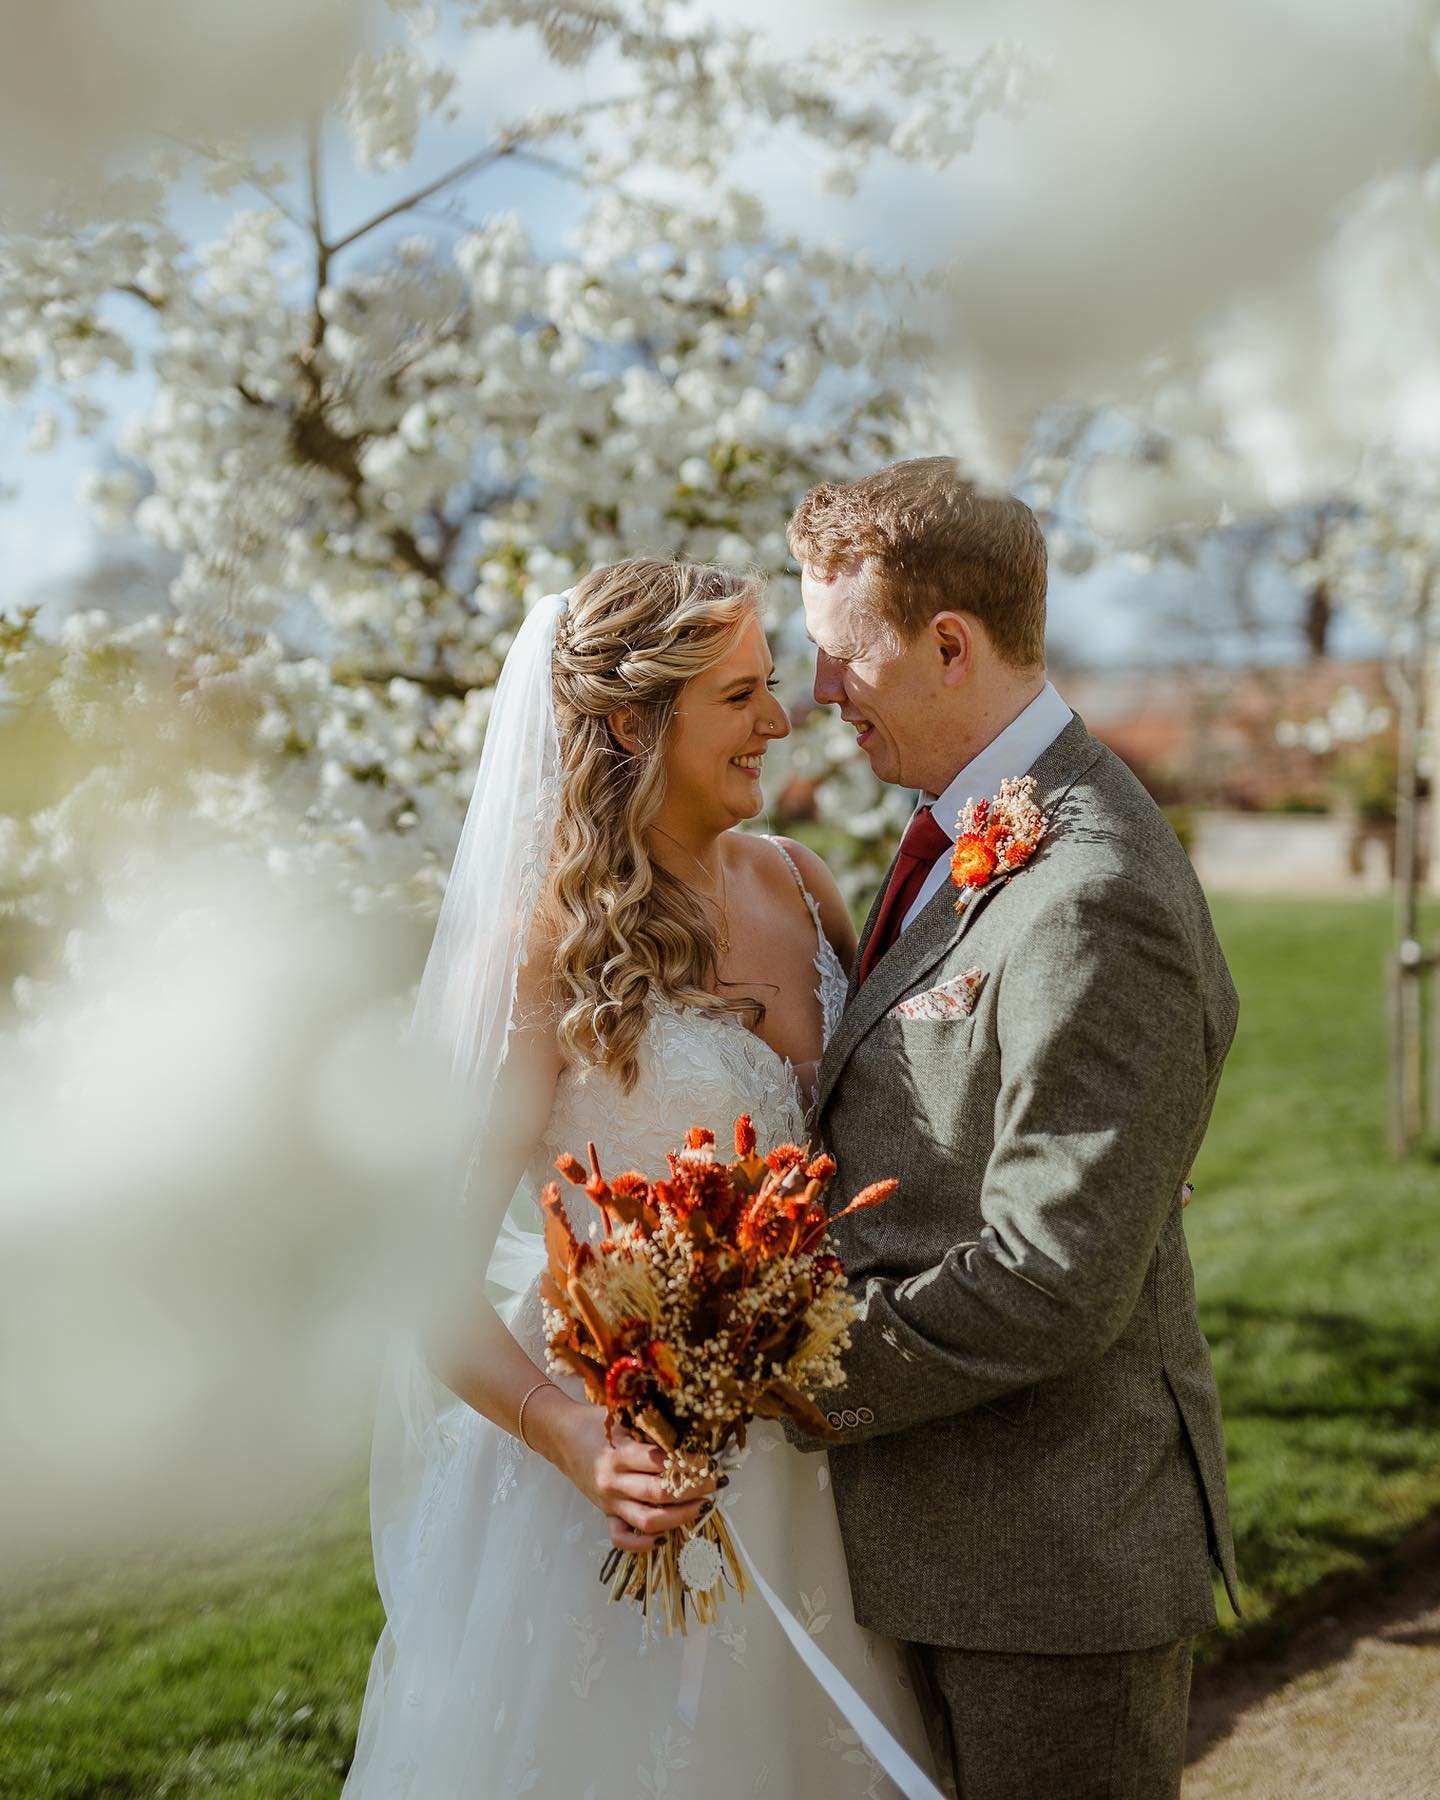 Spring vibes all around us 🥰

V &amp; C here on their absolutely amazing day in @thorpegarden with spring blossoms 🤍
I literally asked for sunshine for their day and.. after many days of rain it was fully sunny with fluffy clouds!
We were blessed. 